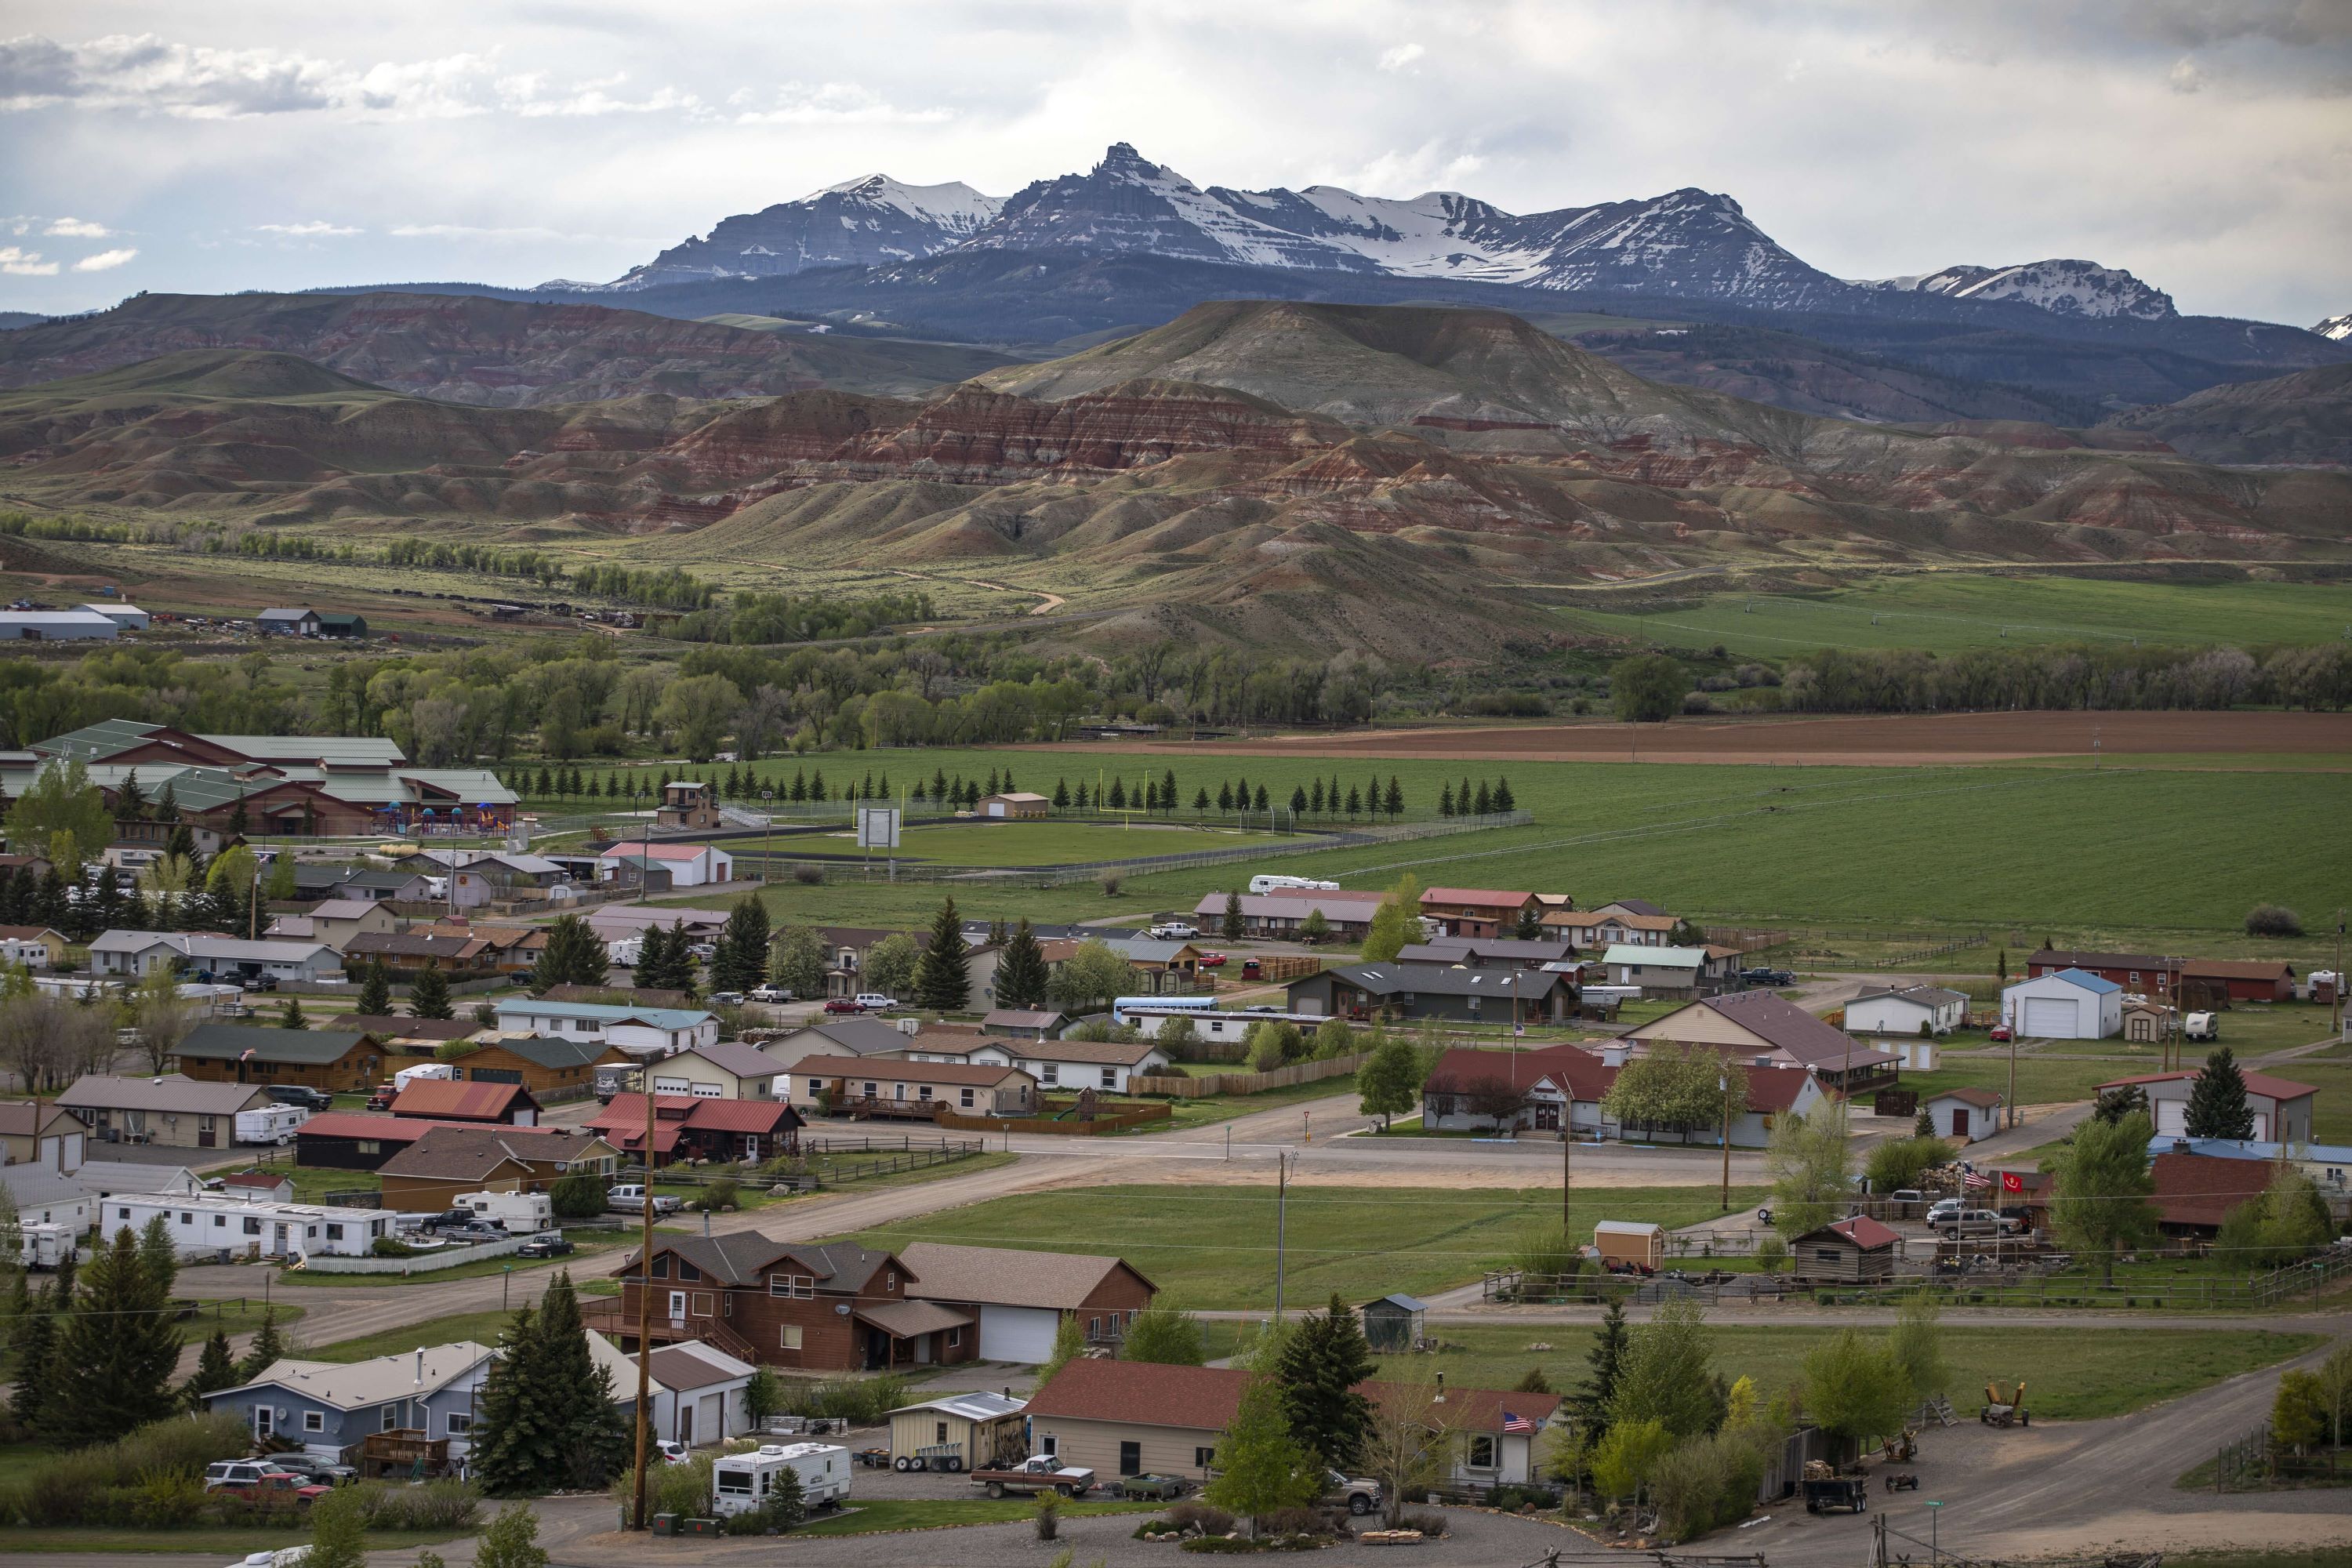 The Best Things to Do in Dubois, Wyoming